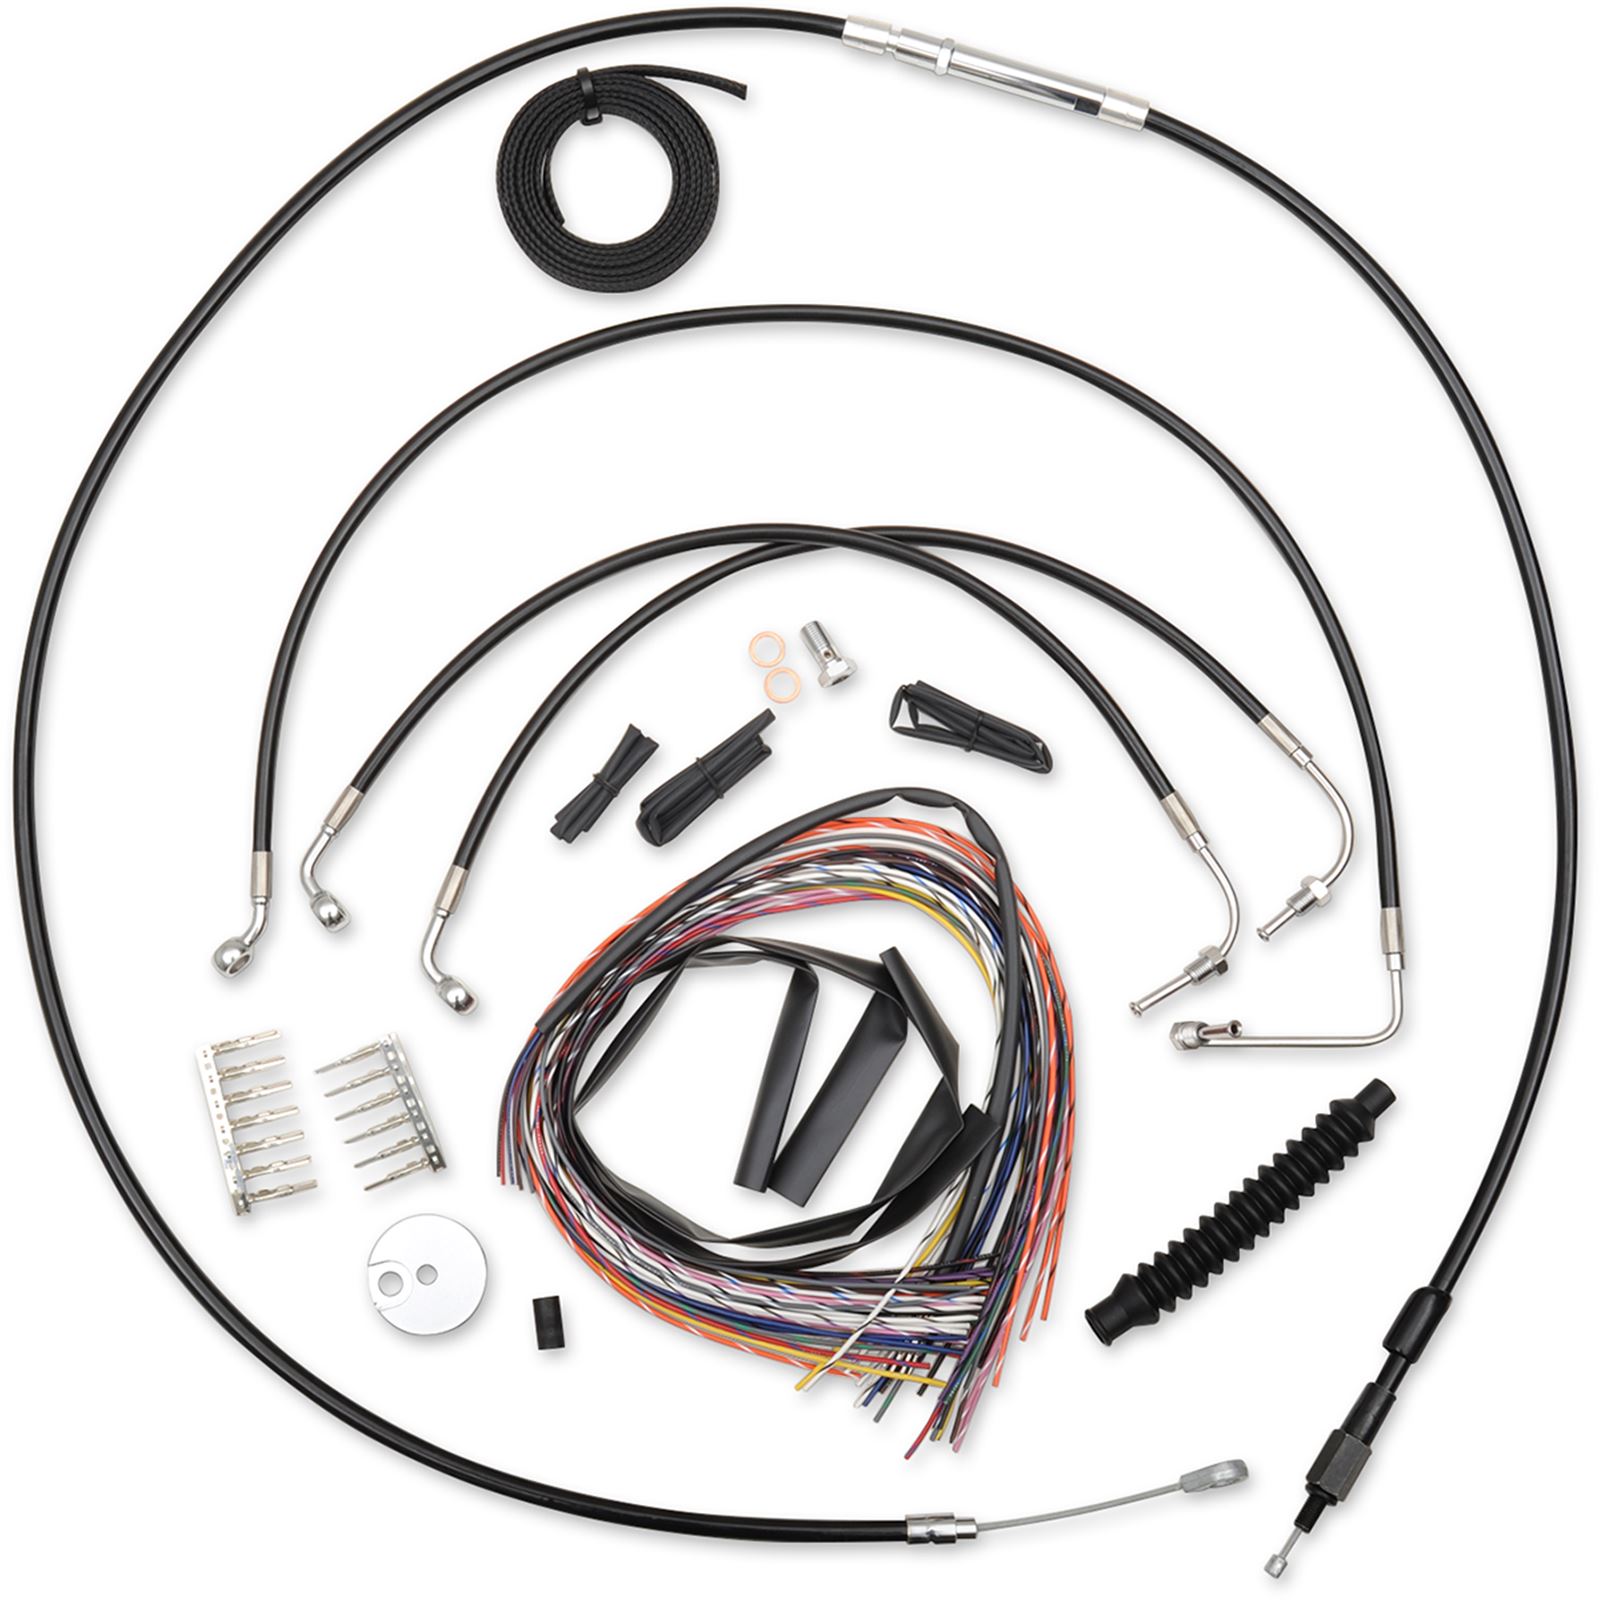 LA Choppers Black 15" - 17" Cable Kit for '16 Street Glide